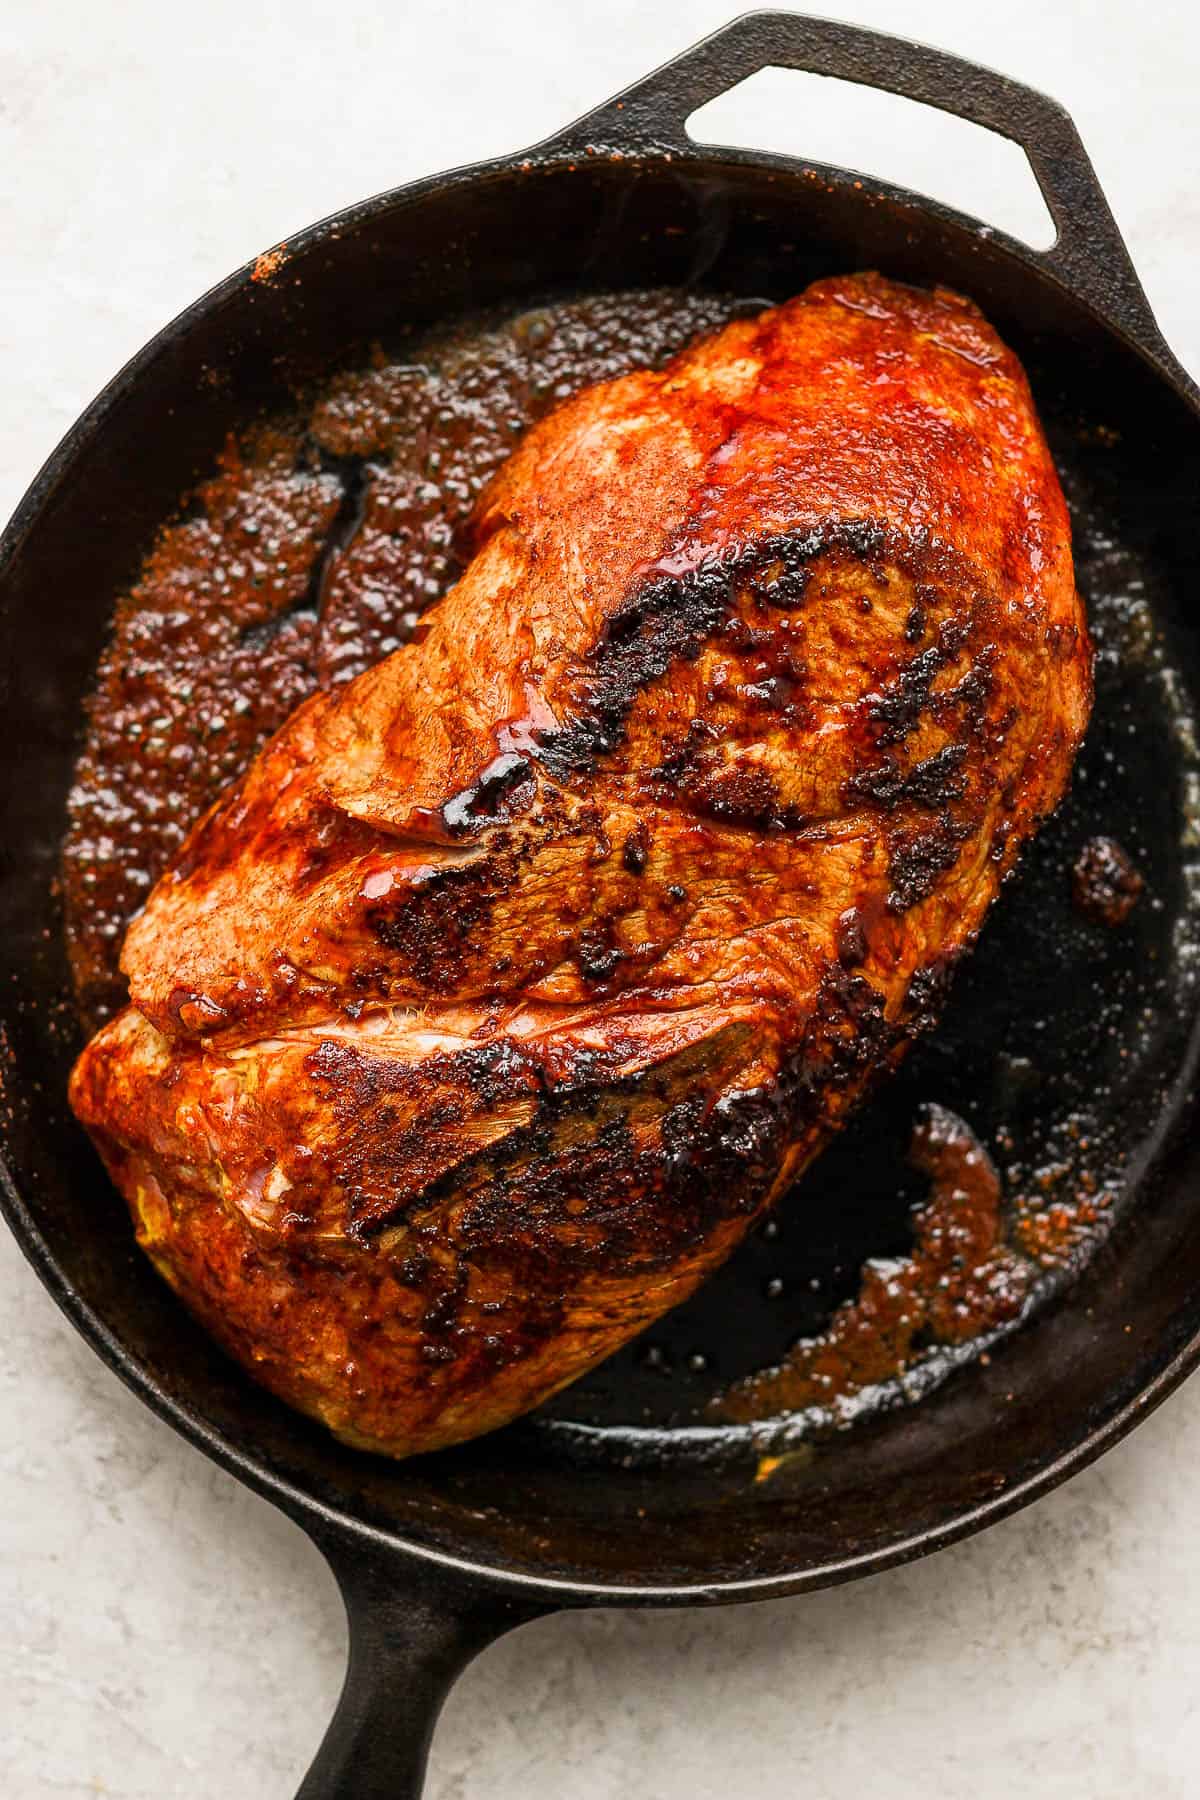 A pork shoulder being seared in a cast iron skillet.